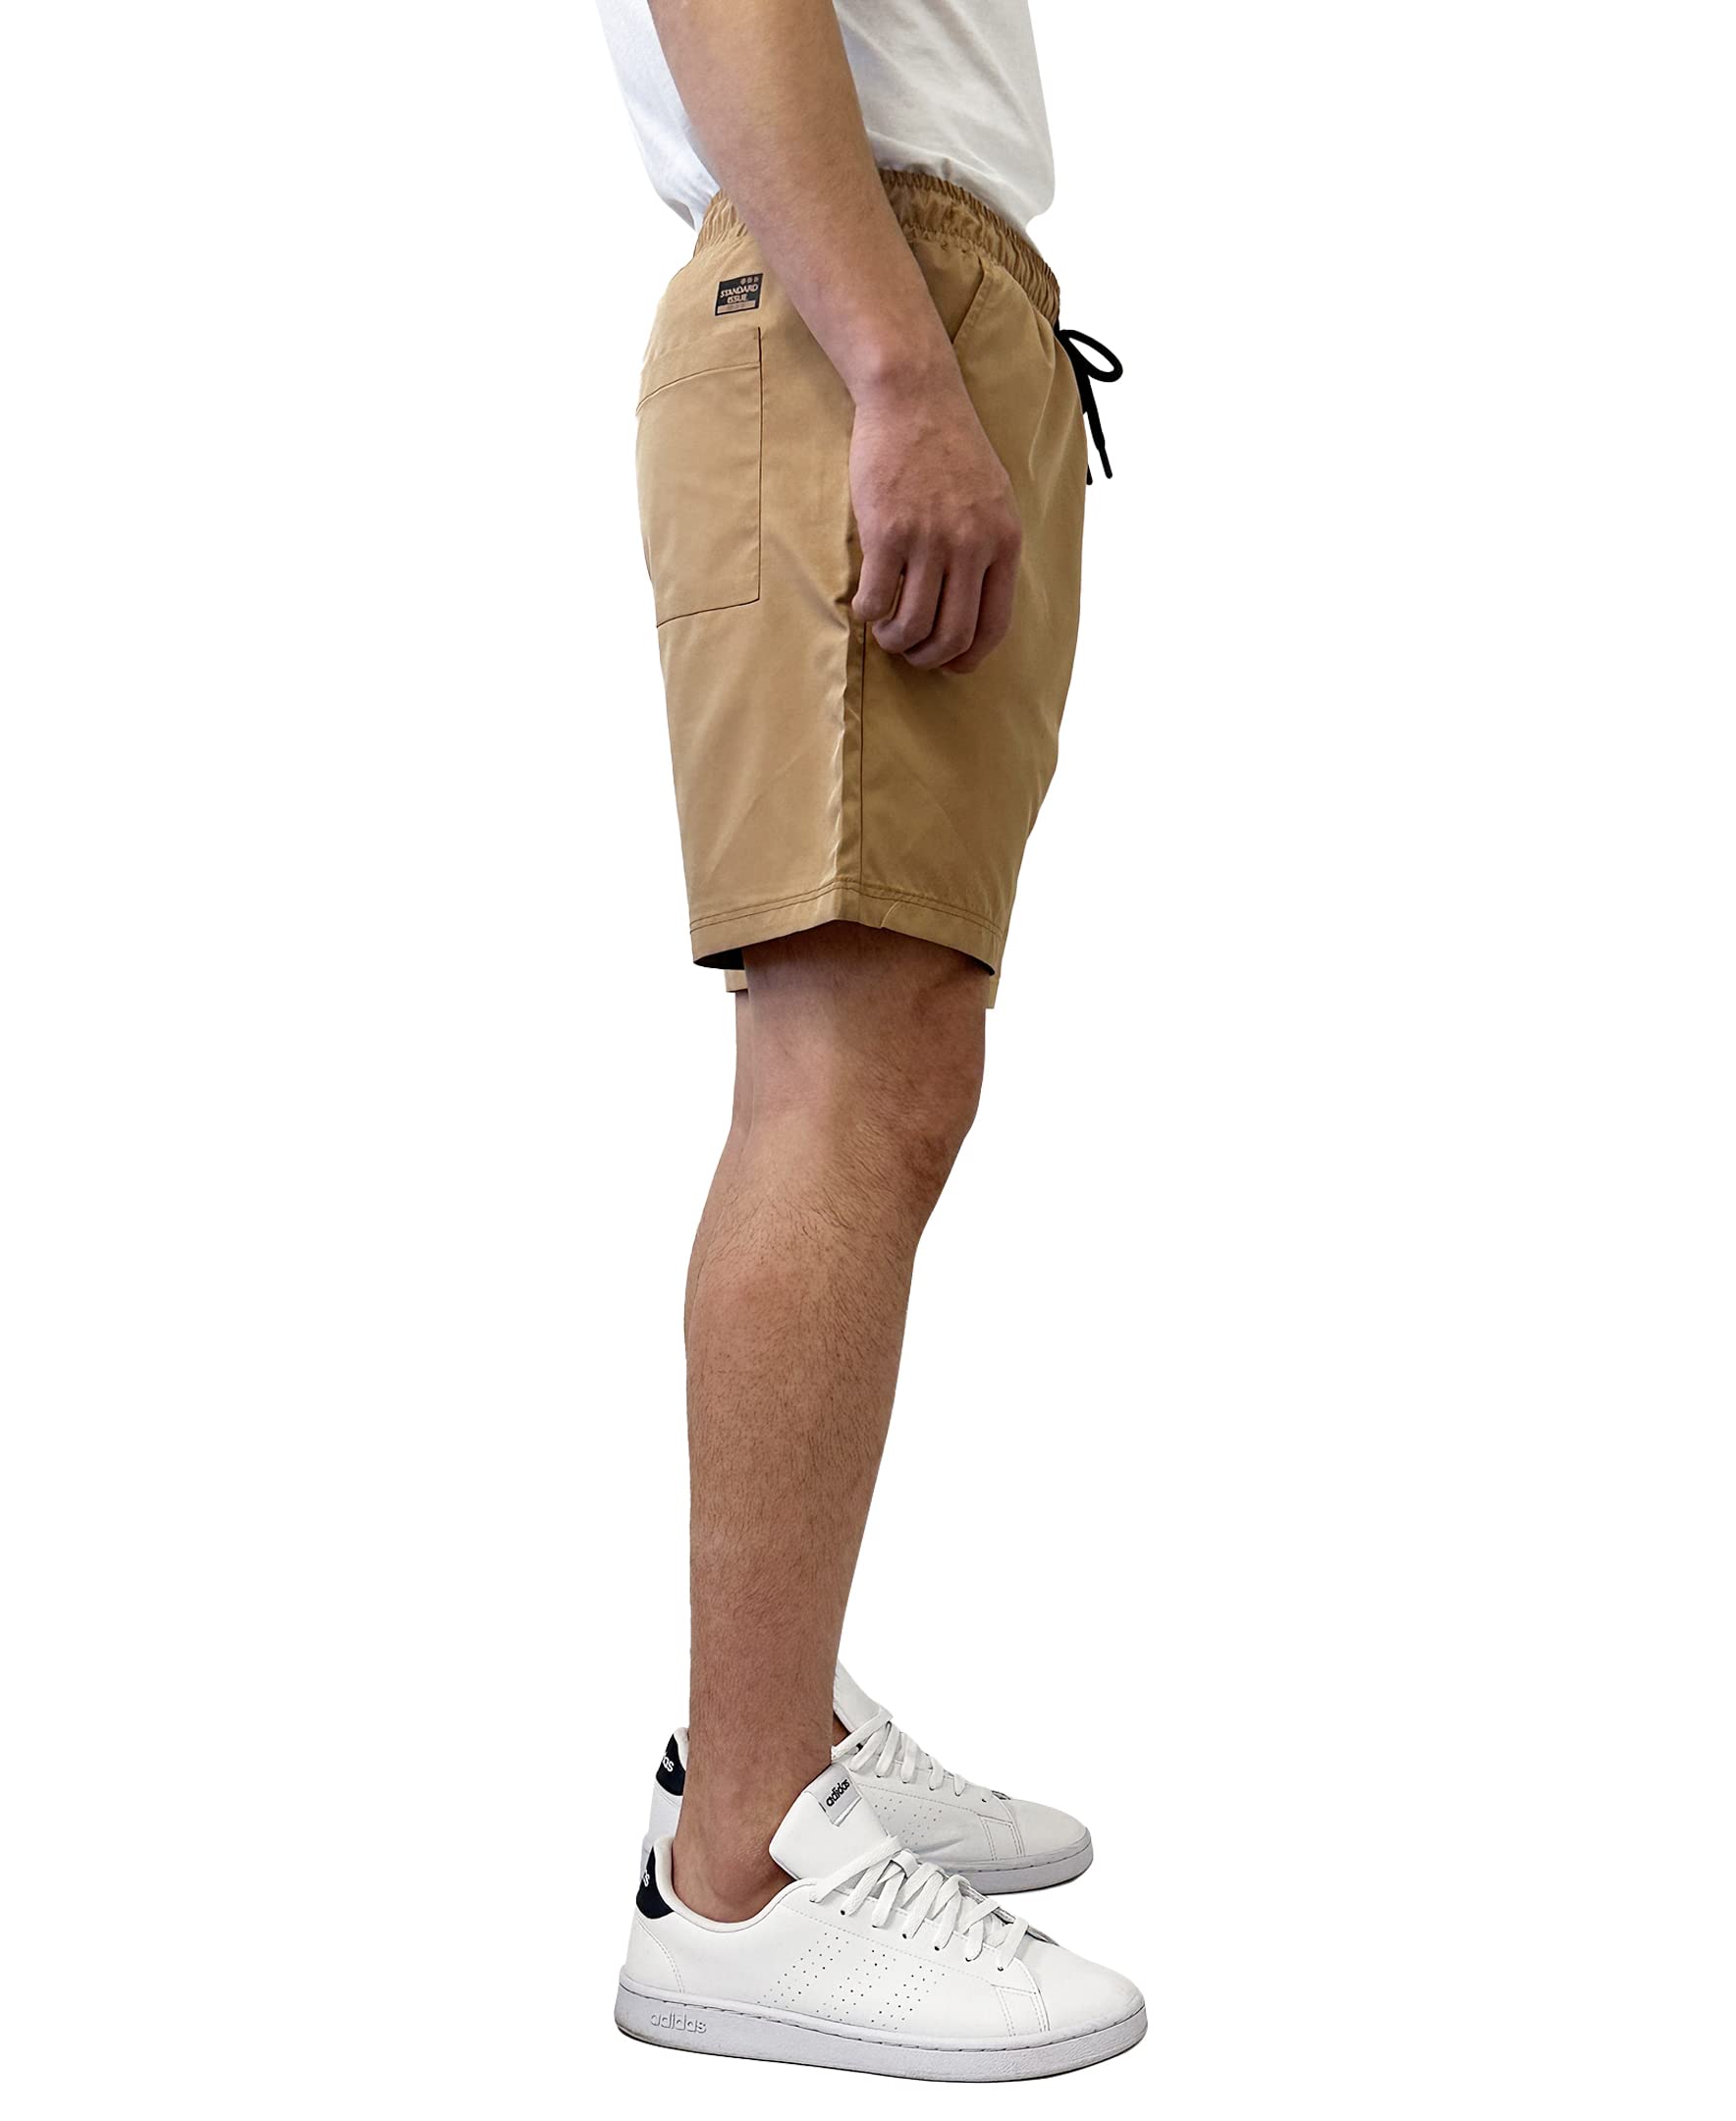 Southpole Men's Quick-Dry Water Resistant Nylon Shorts Inseam 7